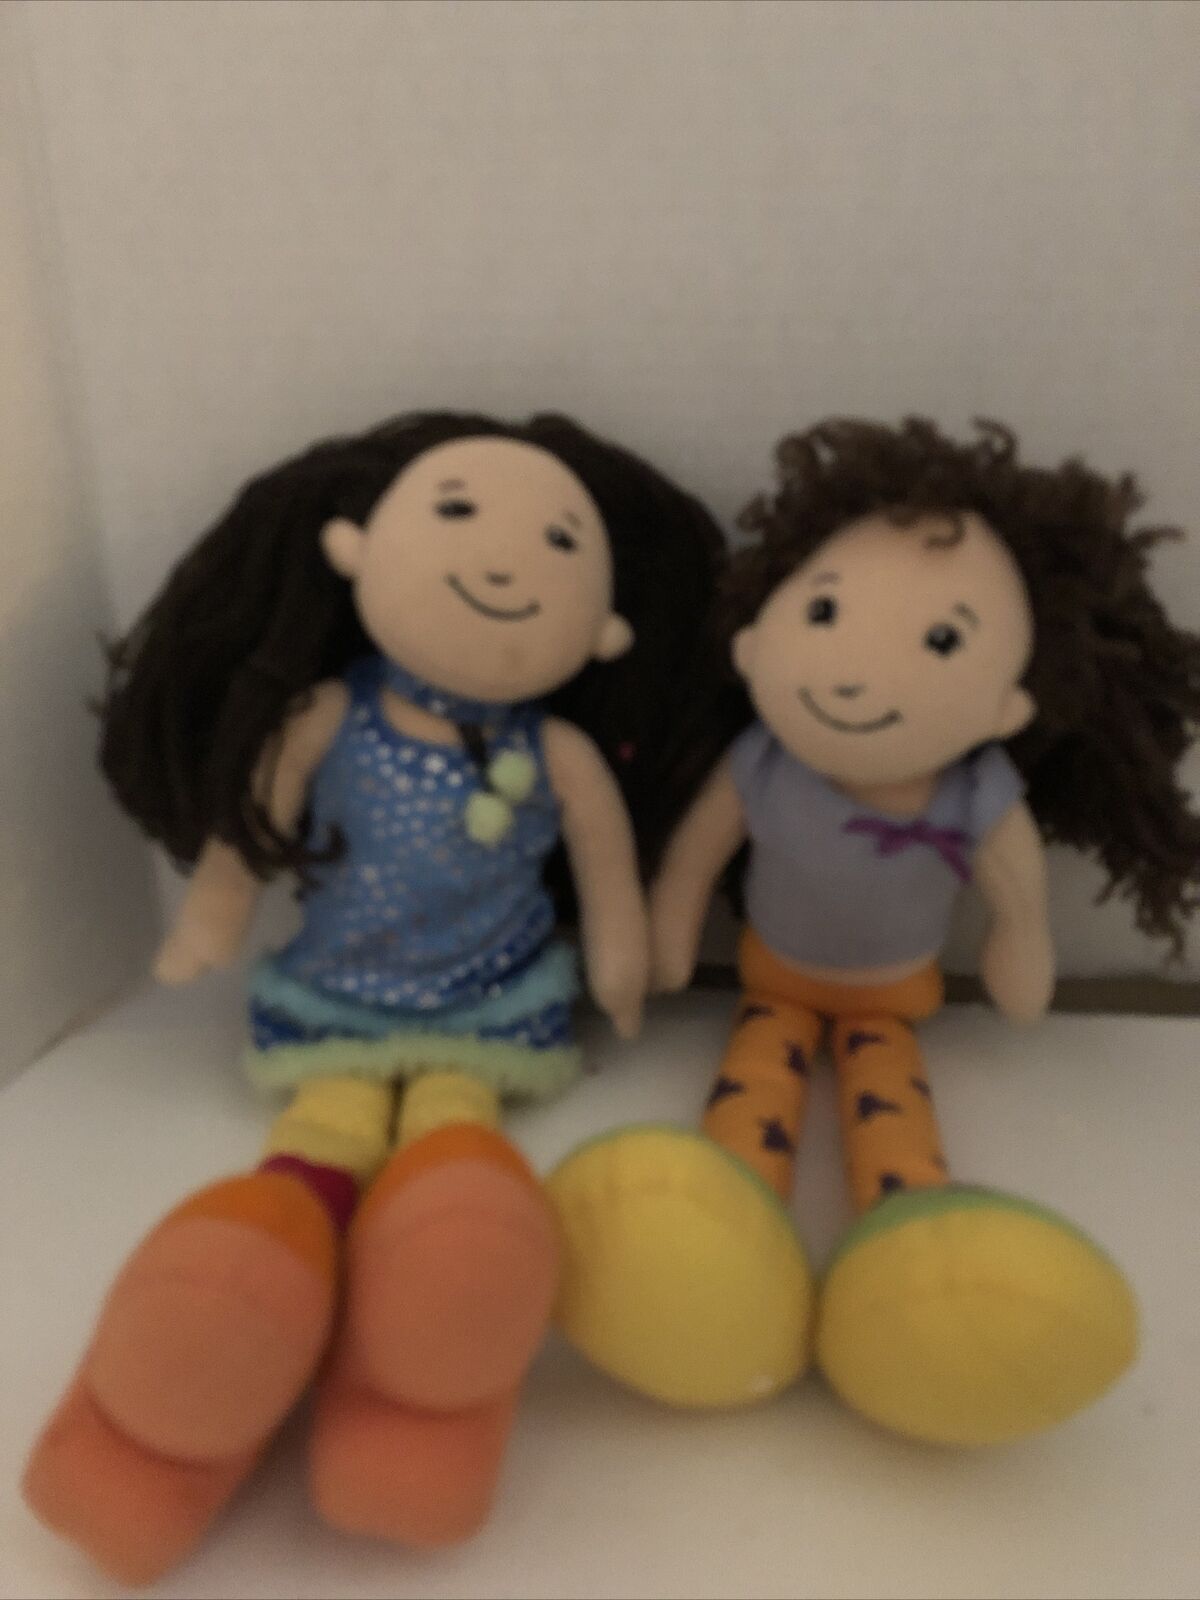 Groovy Girls 2 Dolls  Two Doll Used May Smell Warehouse Find Smells Pattern Legs